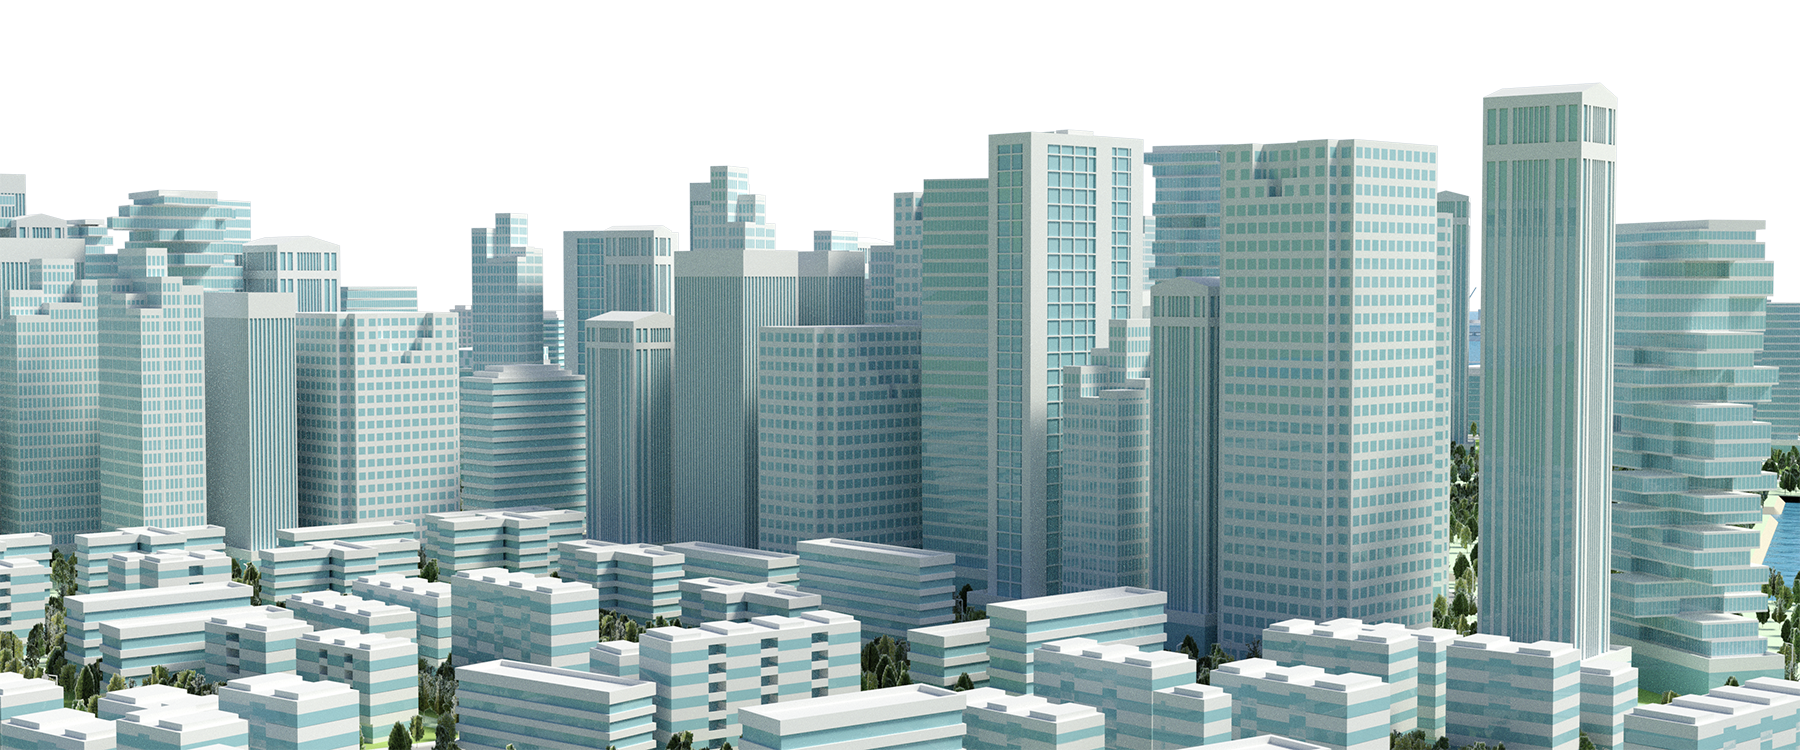 Building City Download Free Image PNG Image